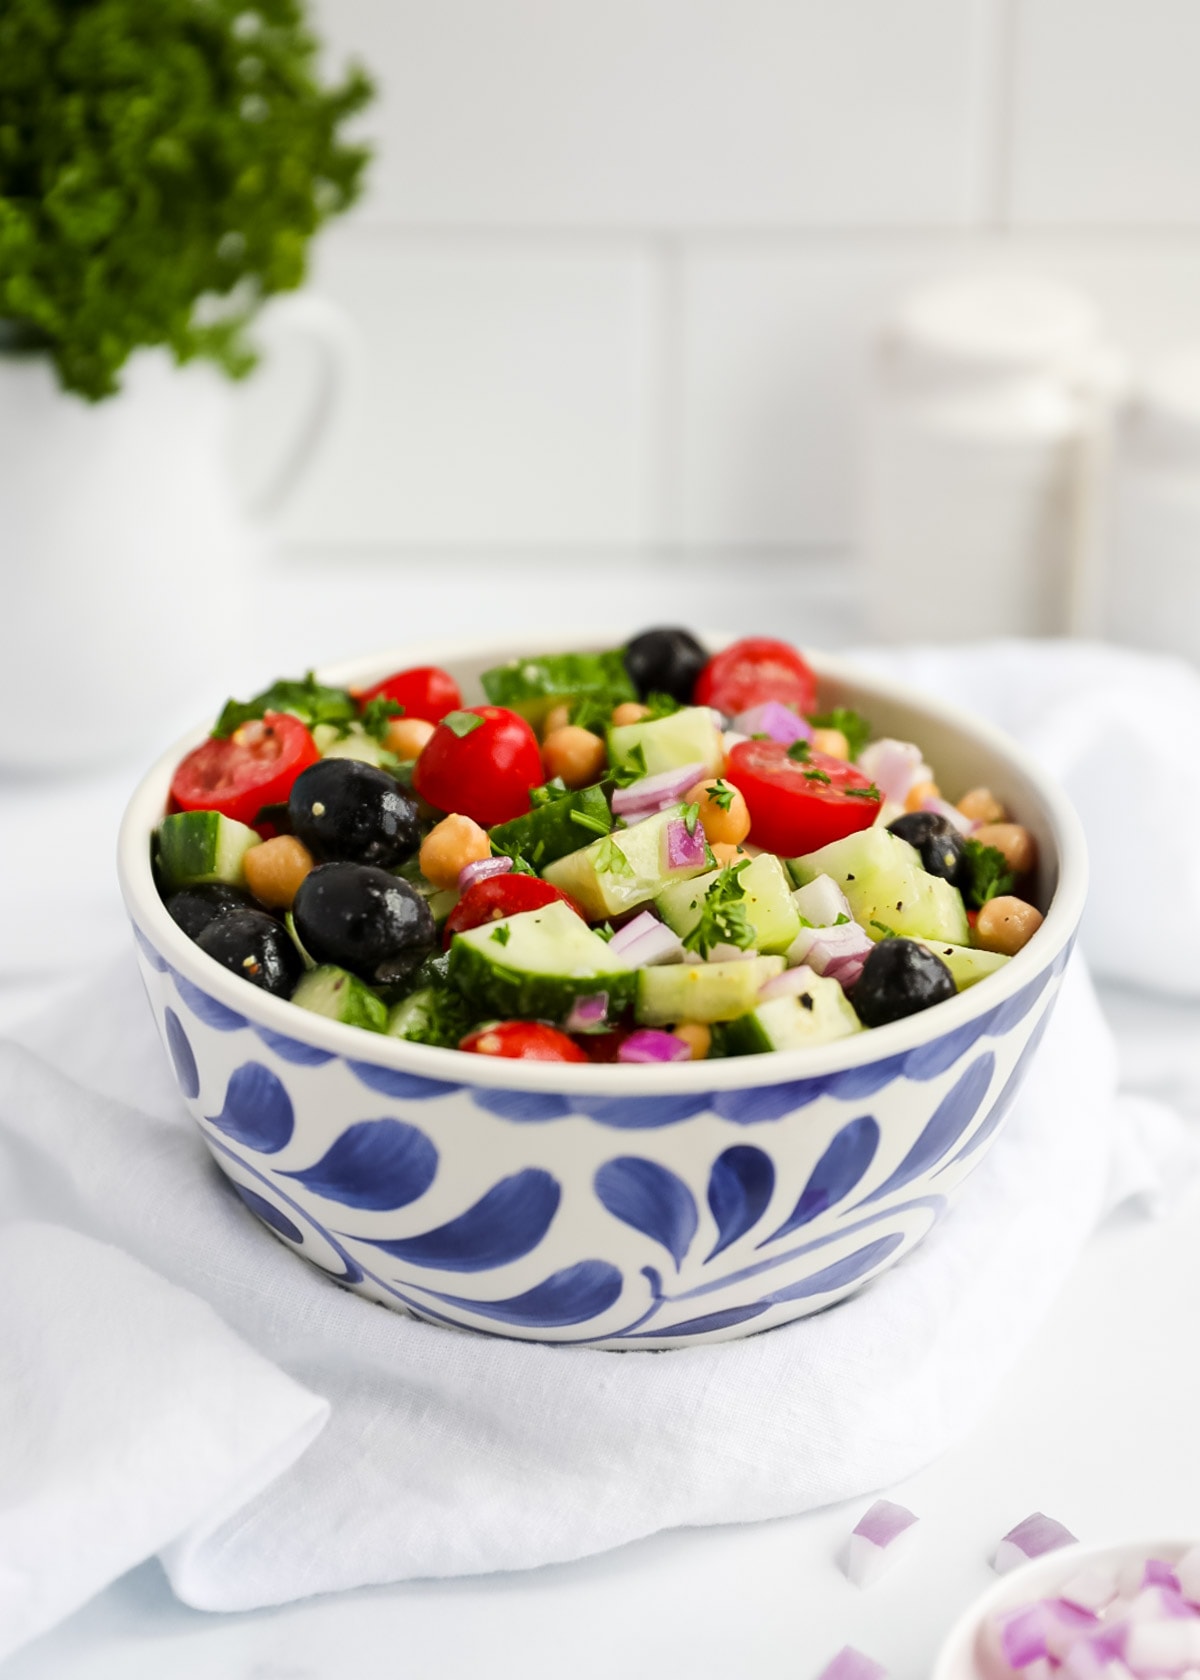 A bowl of cucumber salad with fresh vegetables, chickpeas, olives, and fresh herbs